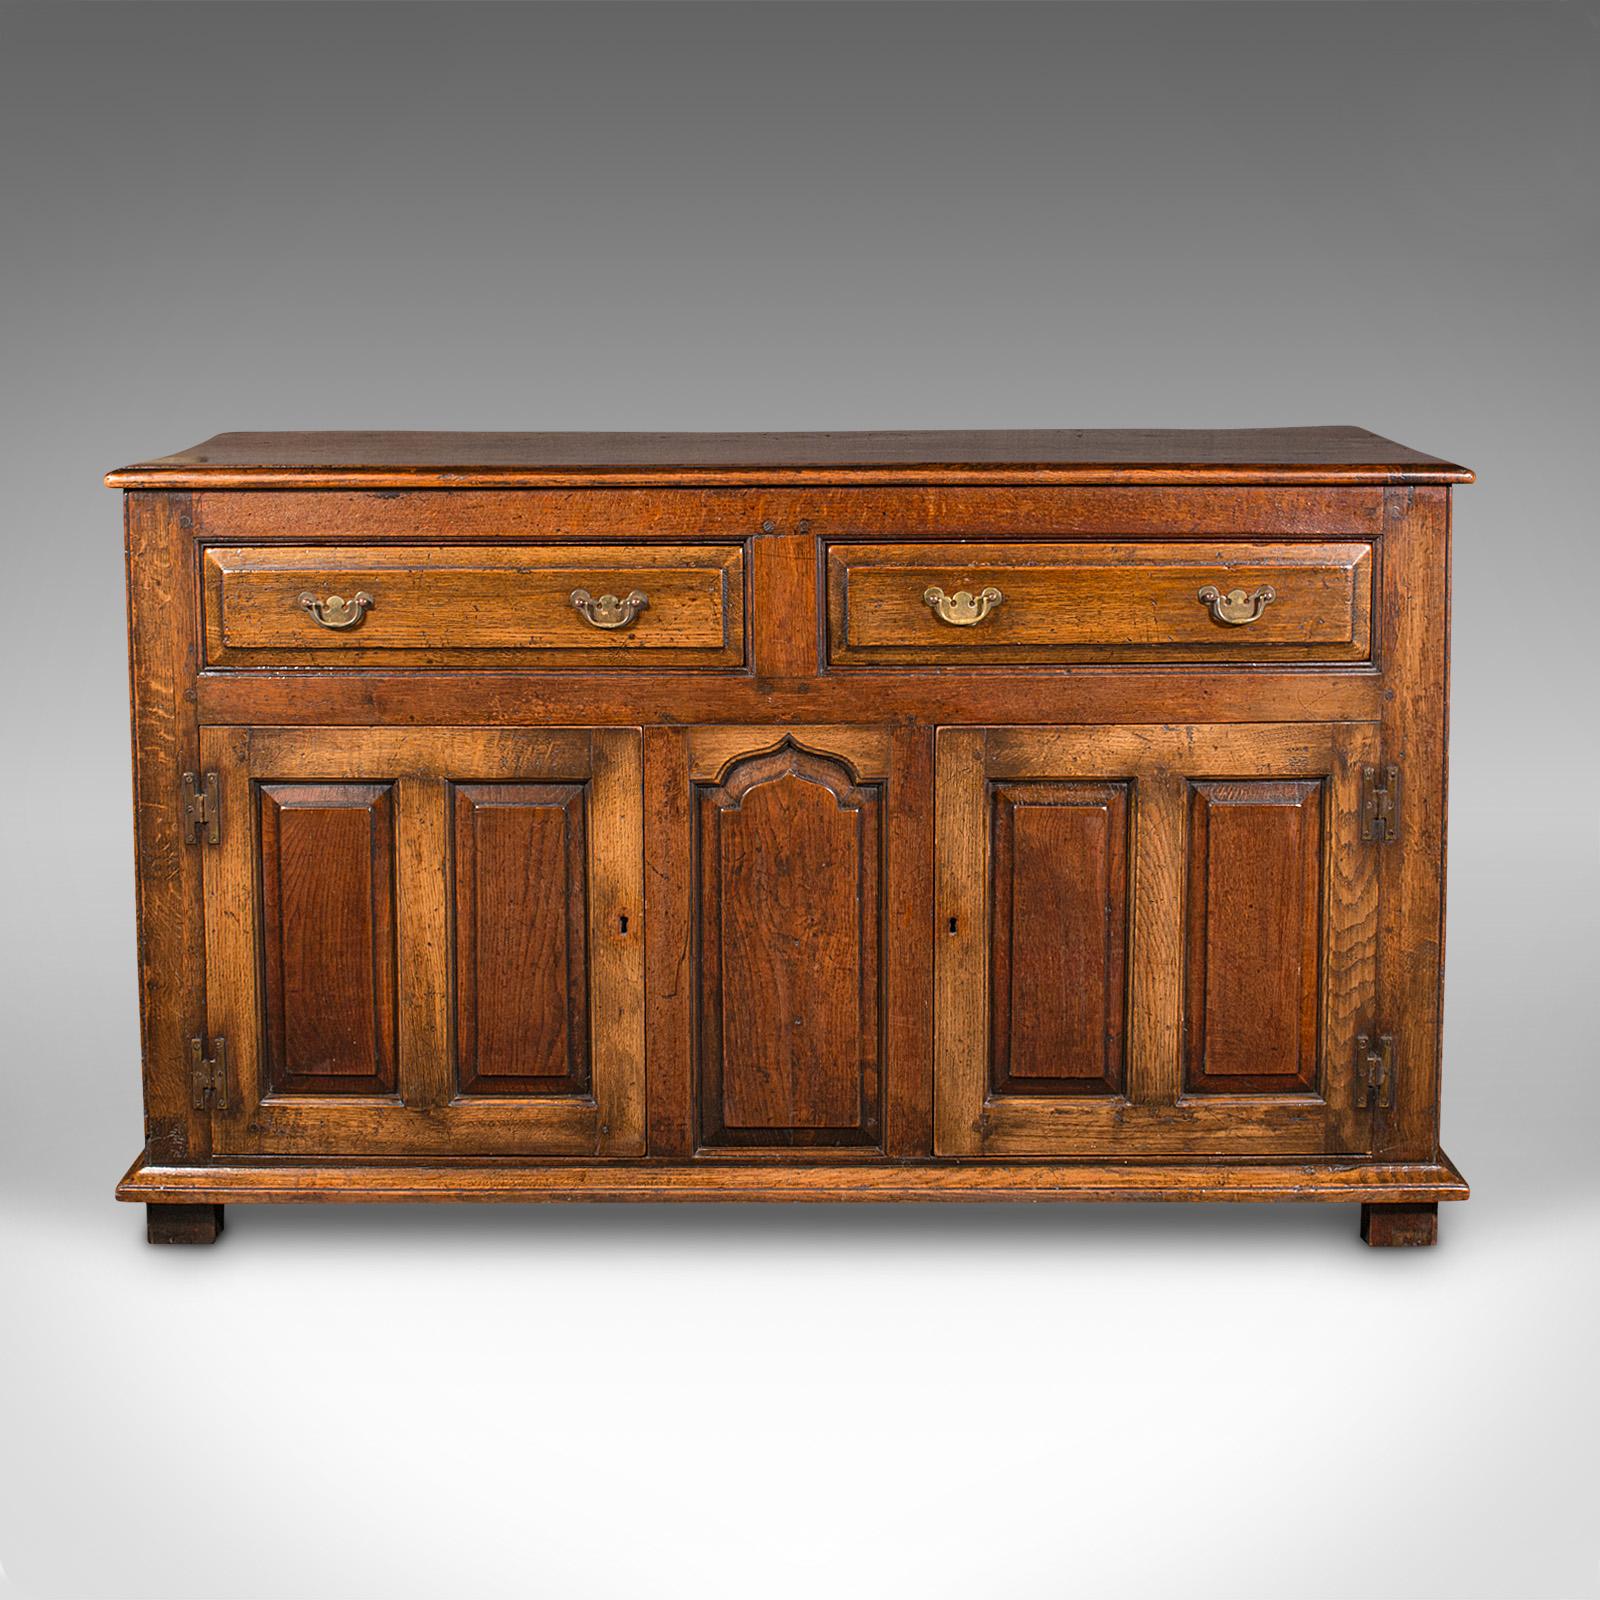 This is an antique country housekeeper's cabinet. An English, oak and elm dresser base, dating to the Georgian period, circa 1800.

Wonderful Georgian cabinetry with appealing proportion
Displays a desirable aged patina and in good order
Select oak